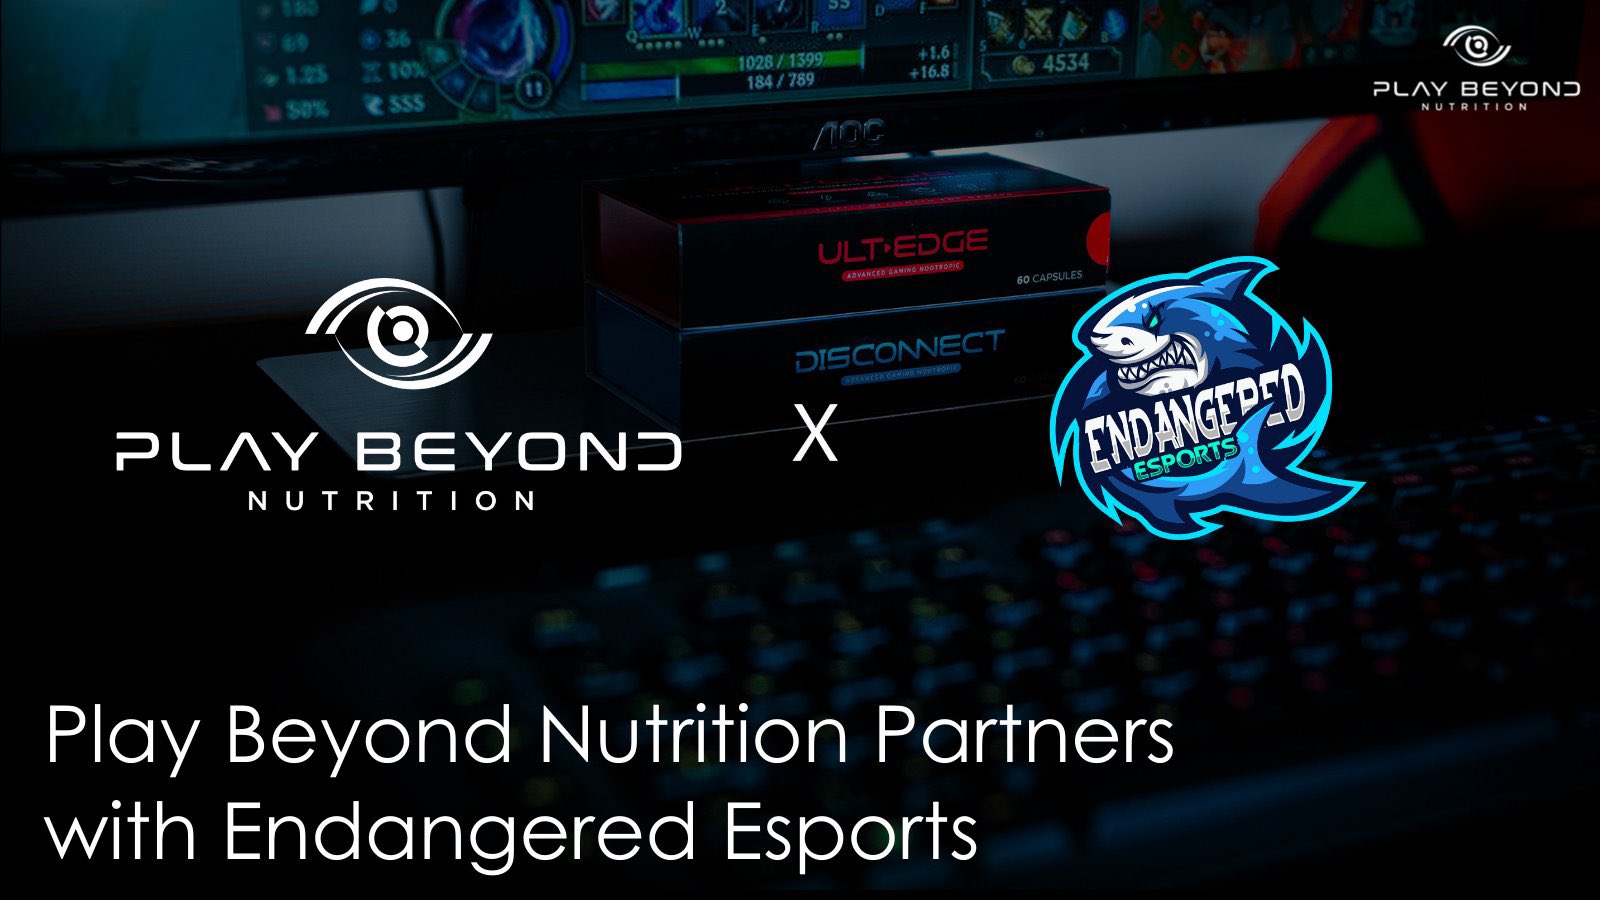 Play Beyond Nutrition announces partnership with UK organisation Endangered Esports, aims to help gamers by ‘elevating player performance through enhanced nutrition and wellbeing’